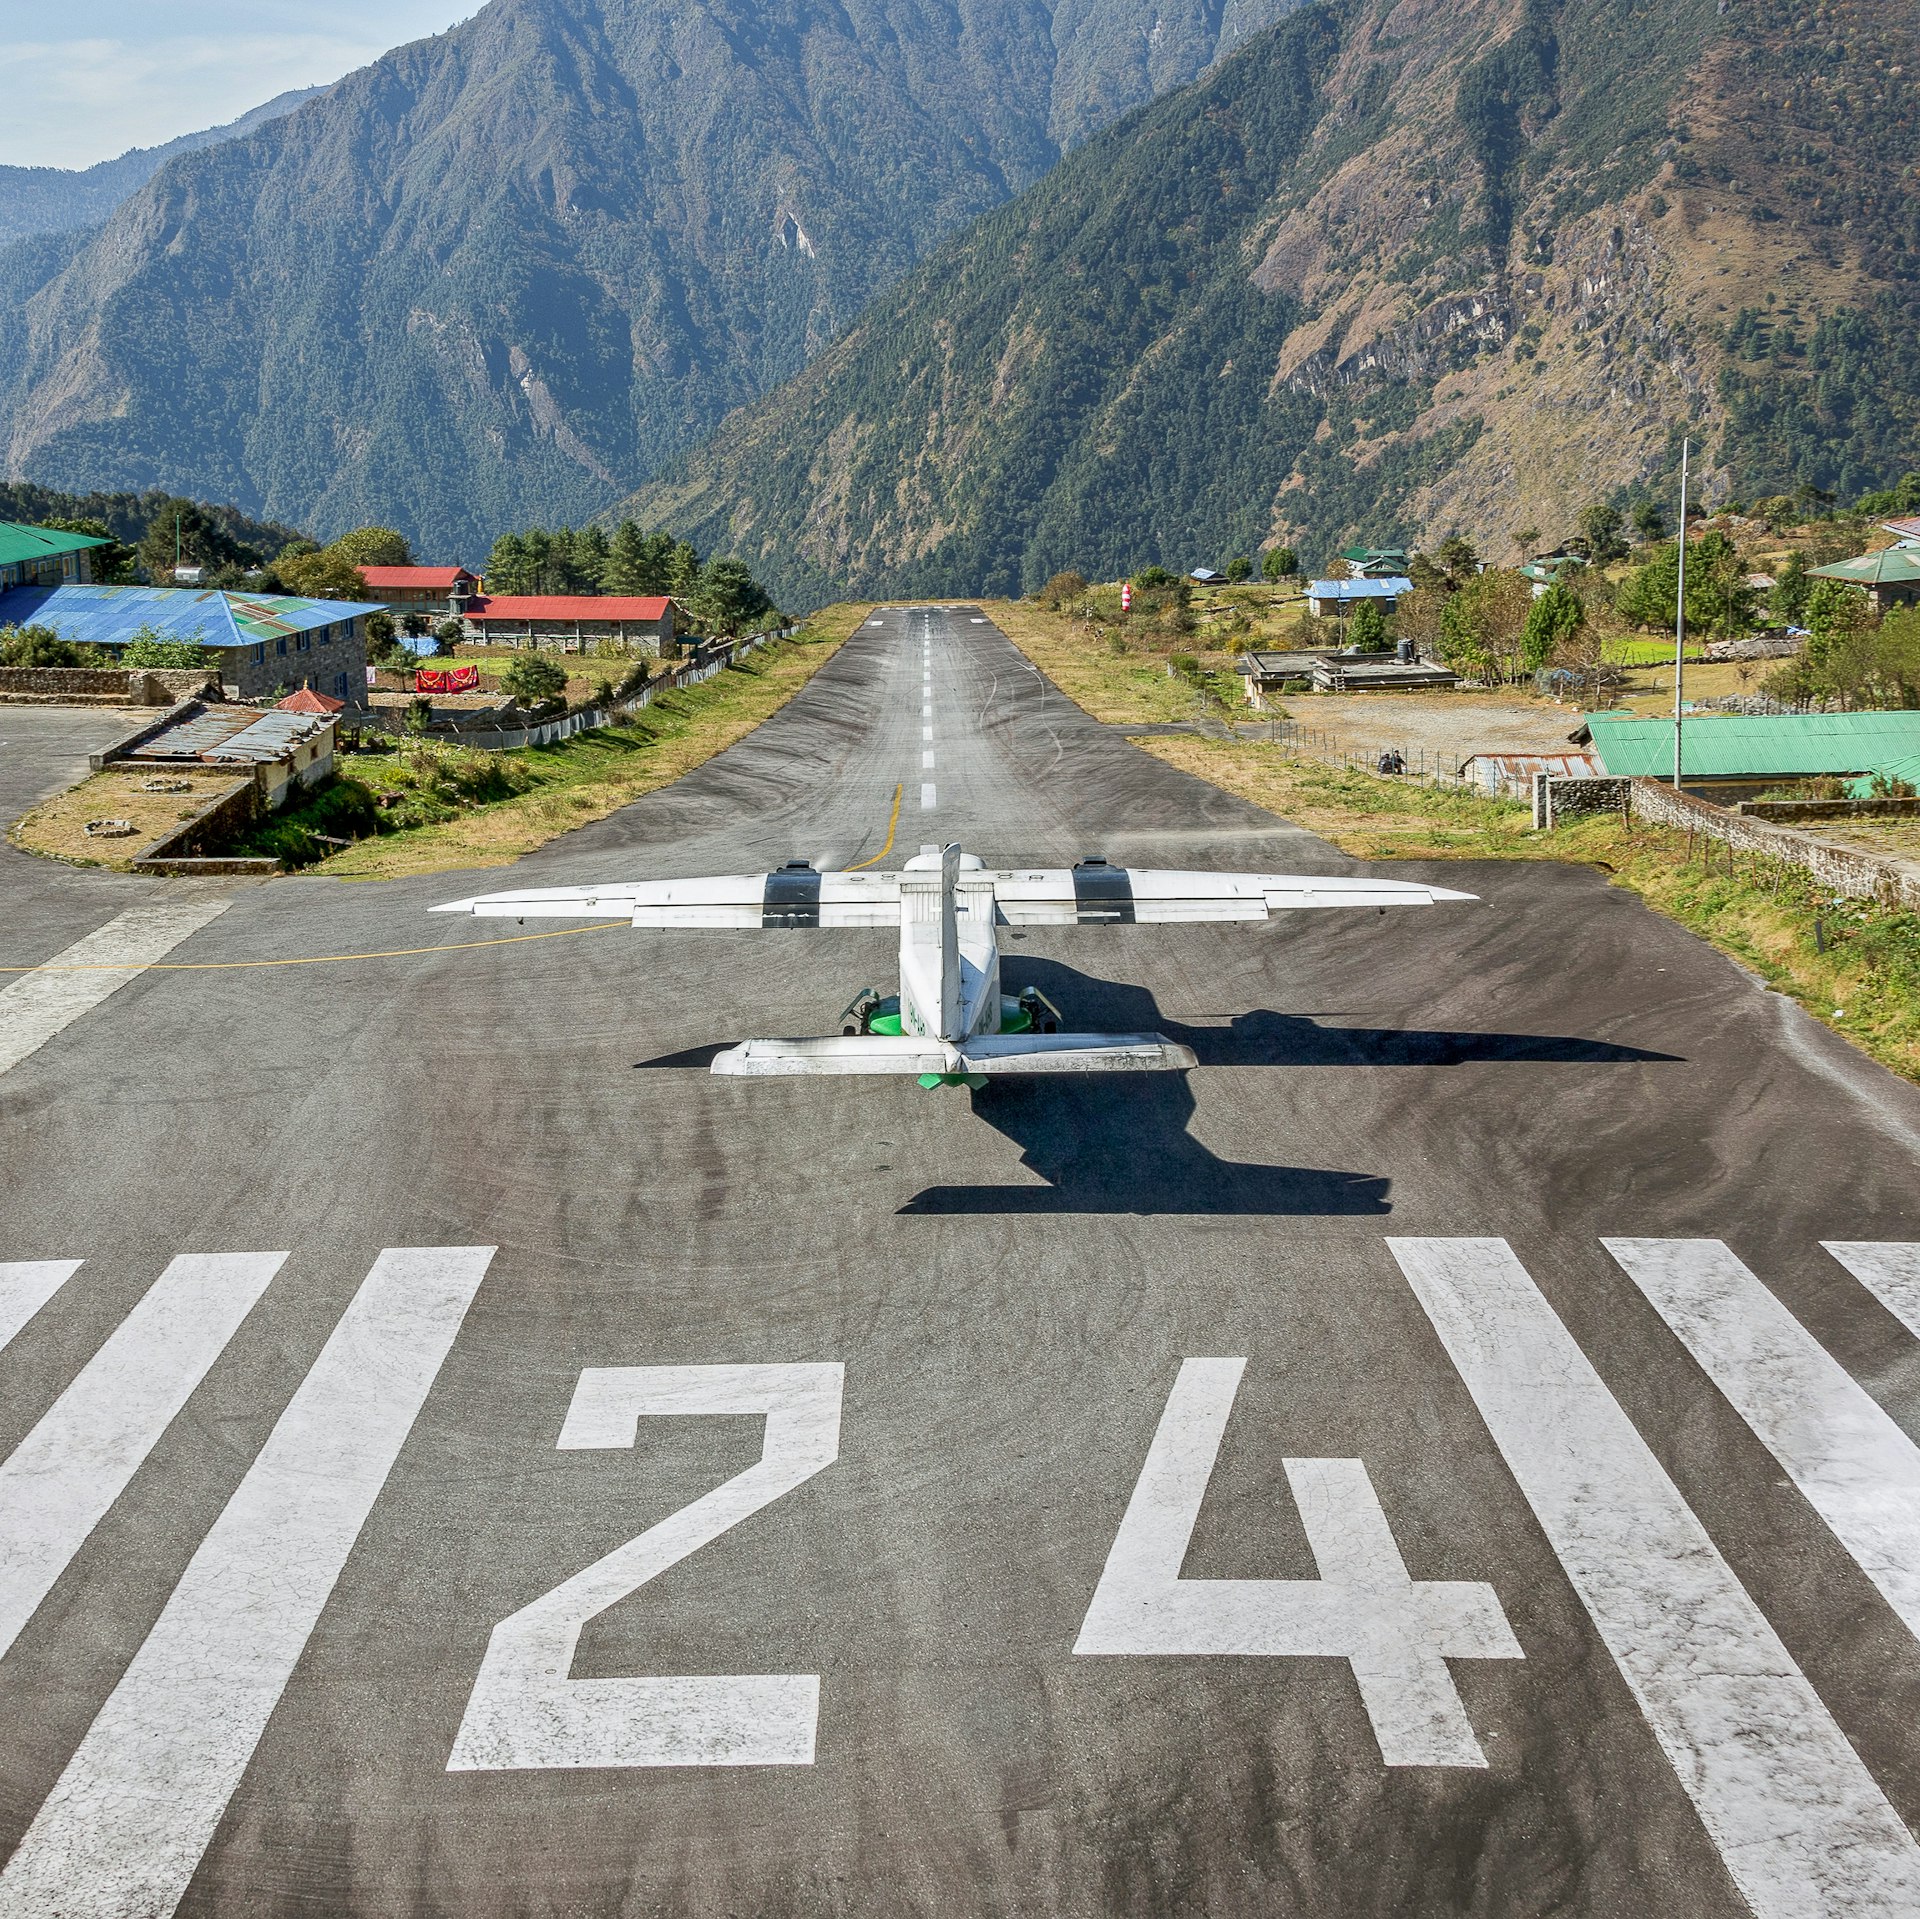 A small plane on the runway at Lukla in Nepal